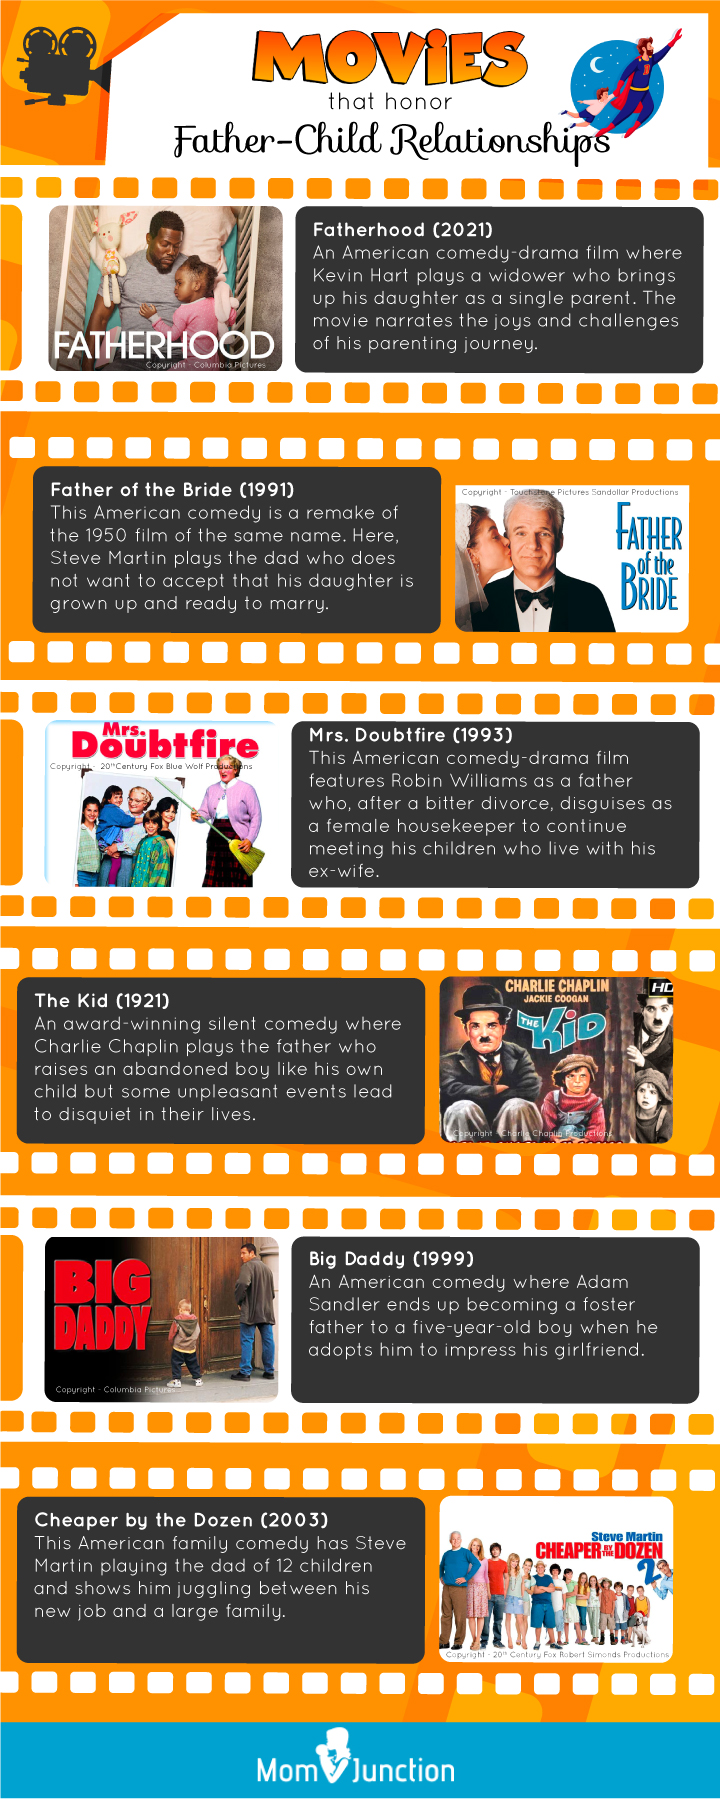 popular movies that honor father-child relationships [infographic]